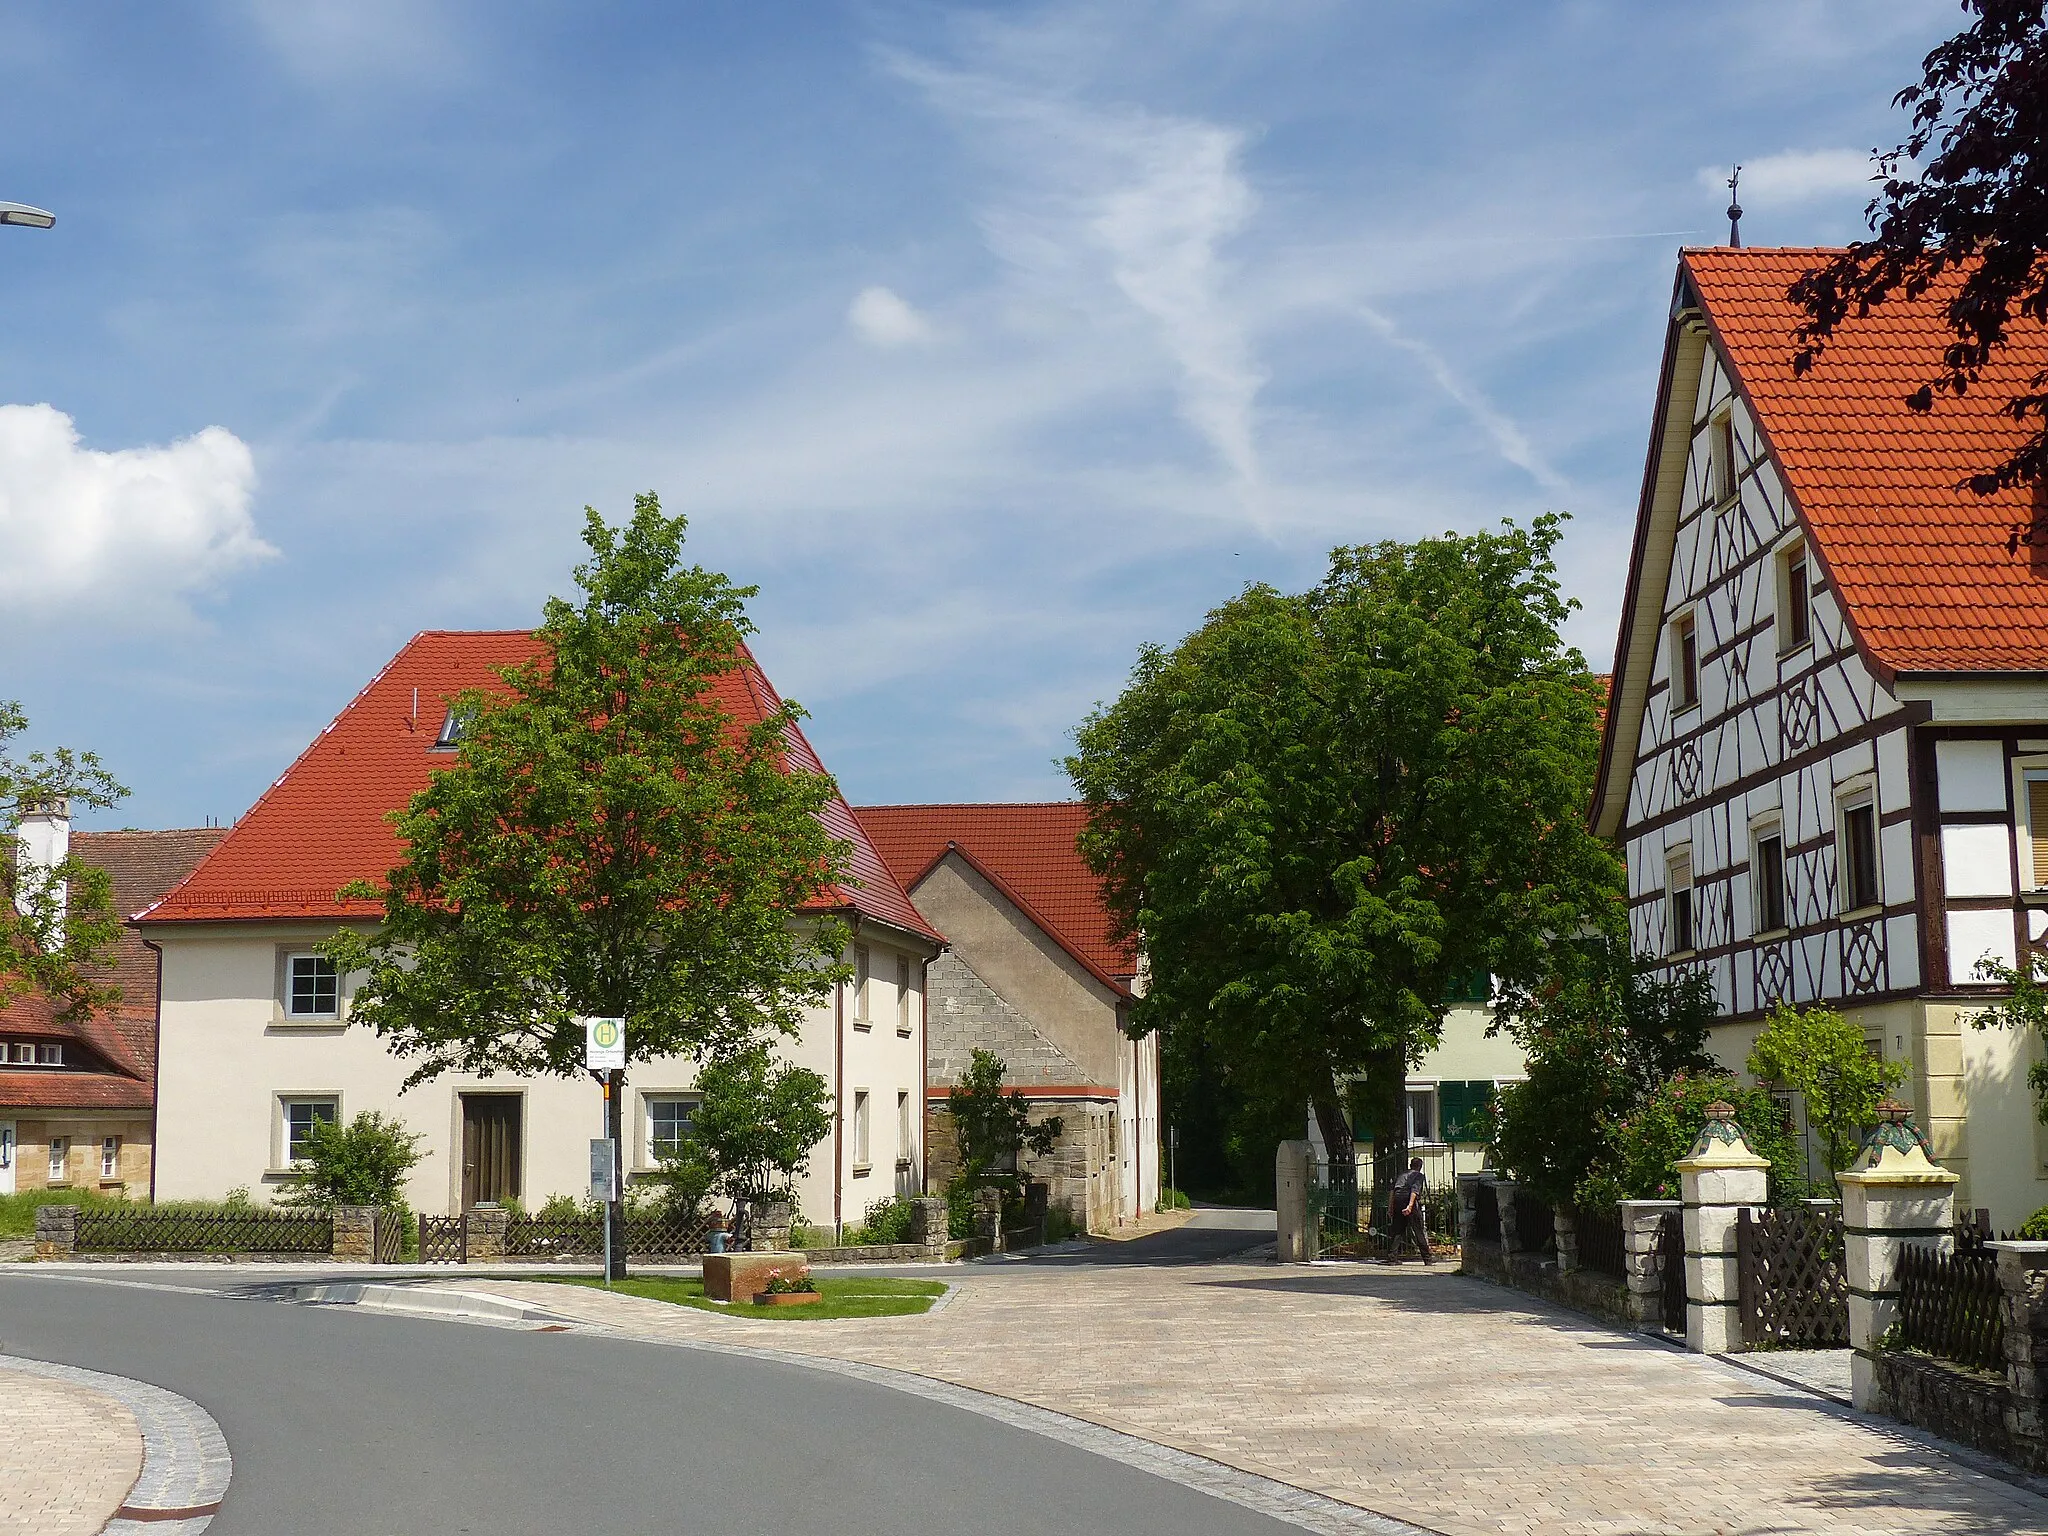 Photo showing: The village Honings, a district of the municipality of Hetzles